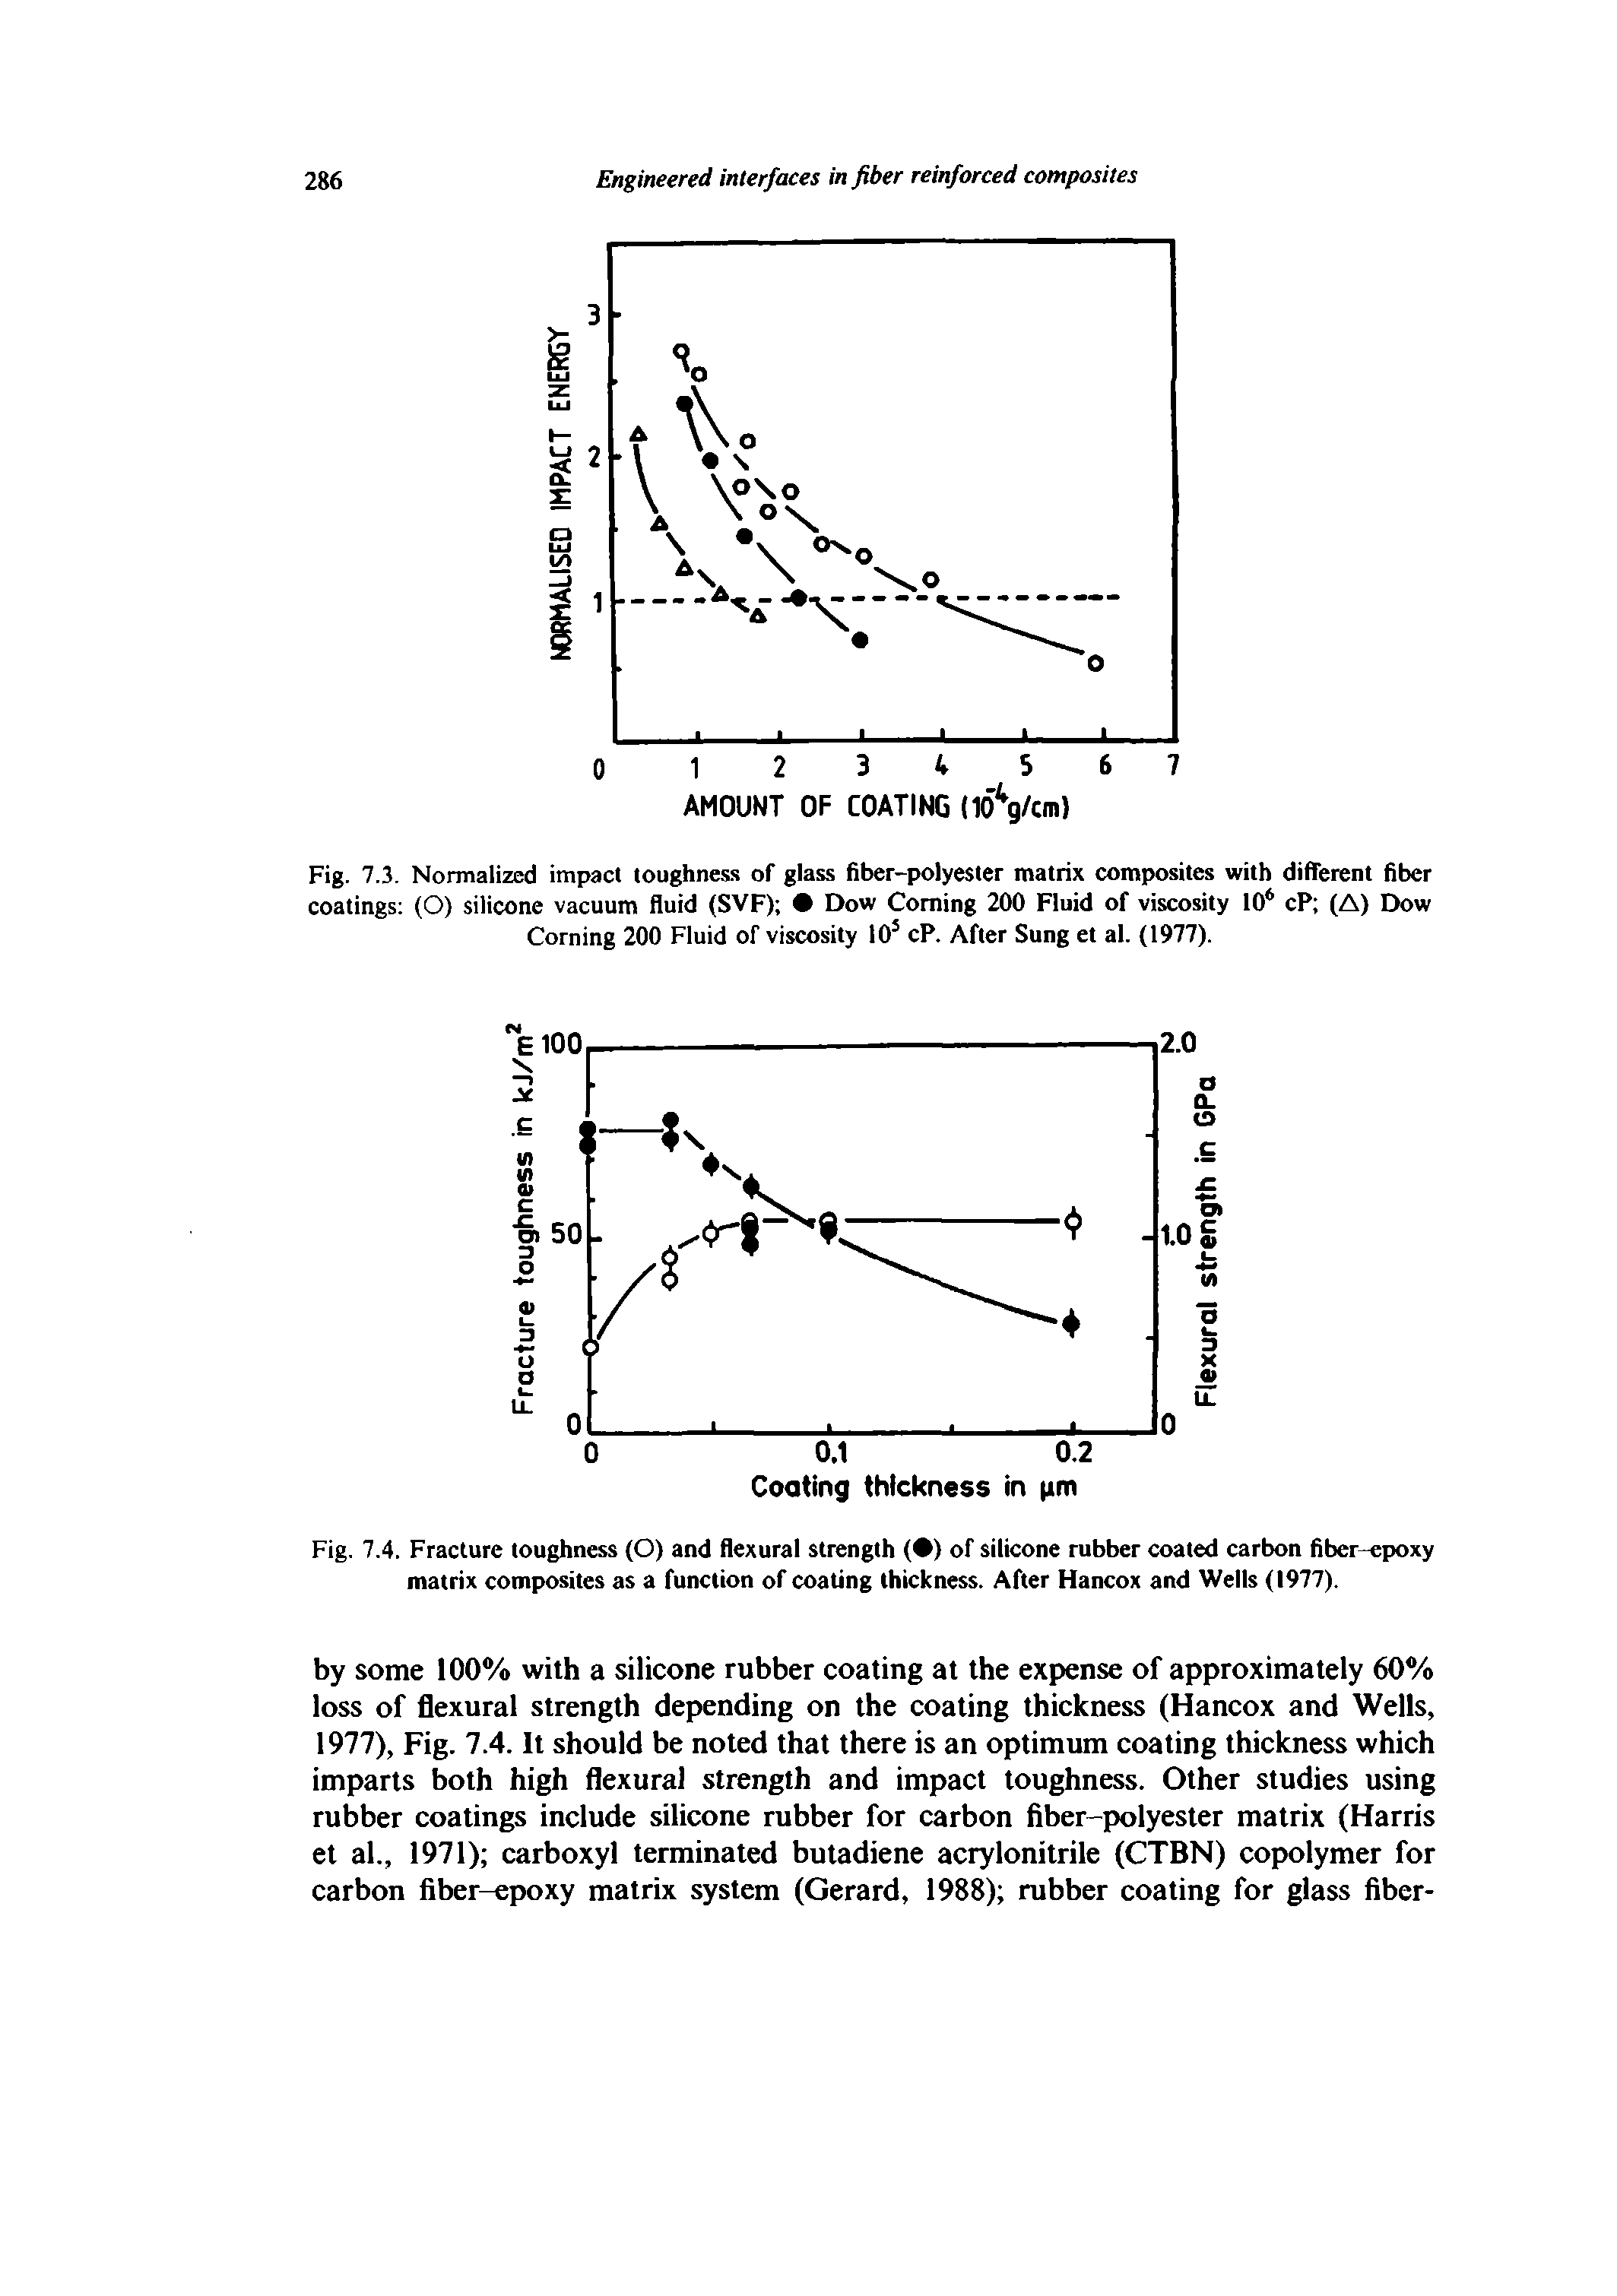 Fig. 7.4. Fracture toughness (O) and flexural strength ( ) of silicone rubber coated carbon fiber-epoxy matrix composites as a function of coating thickness. After Hancox and Wells (1977).